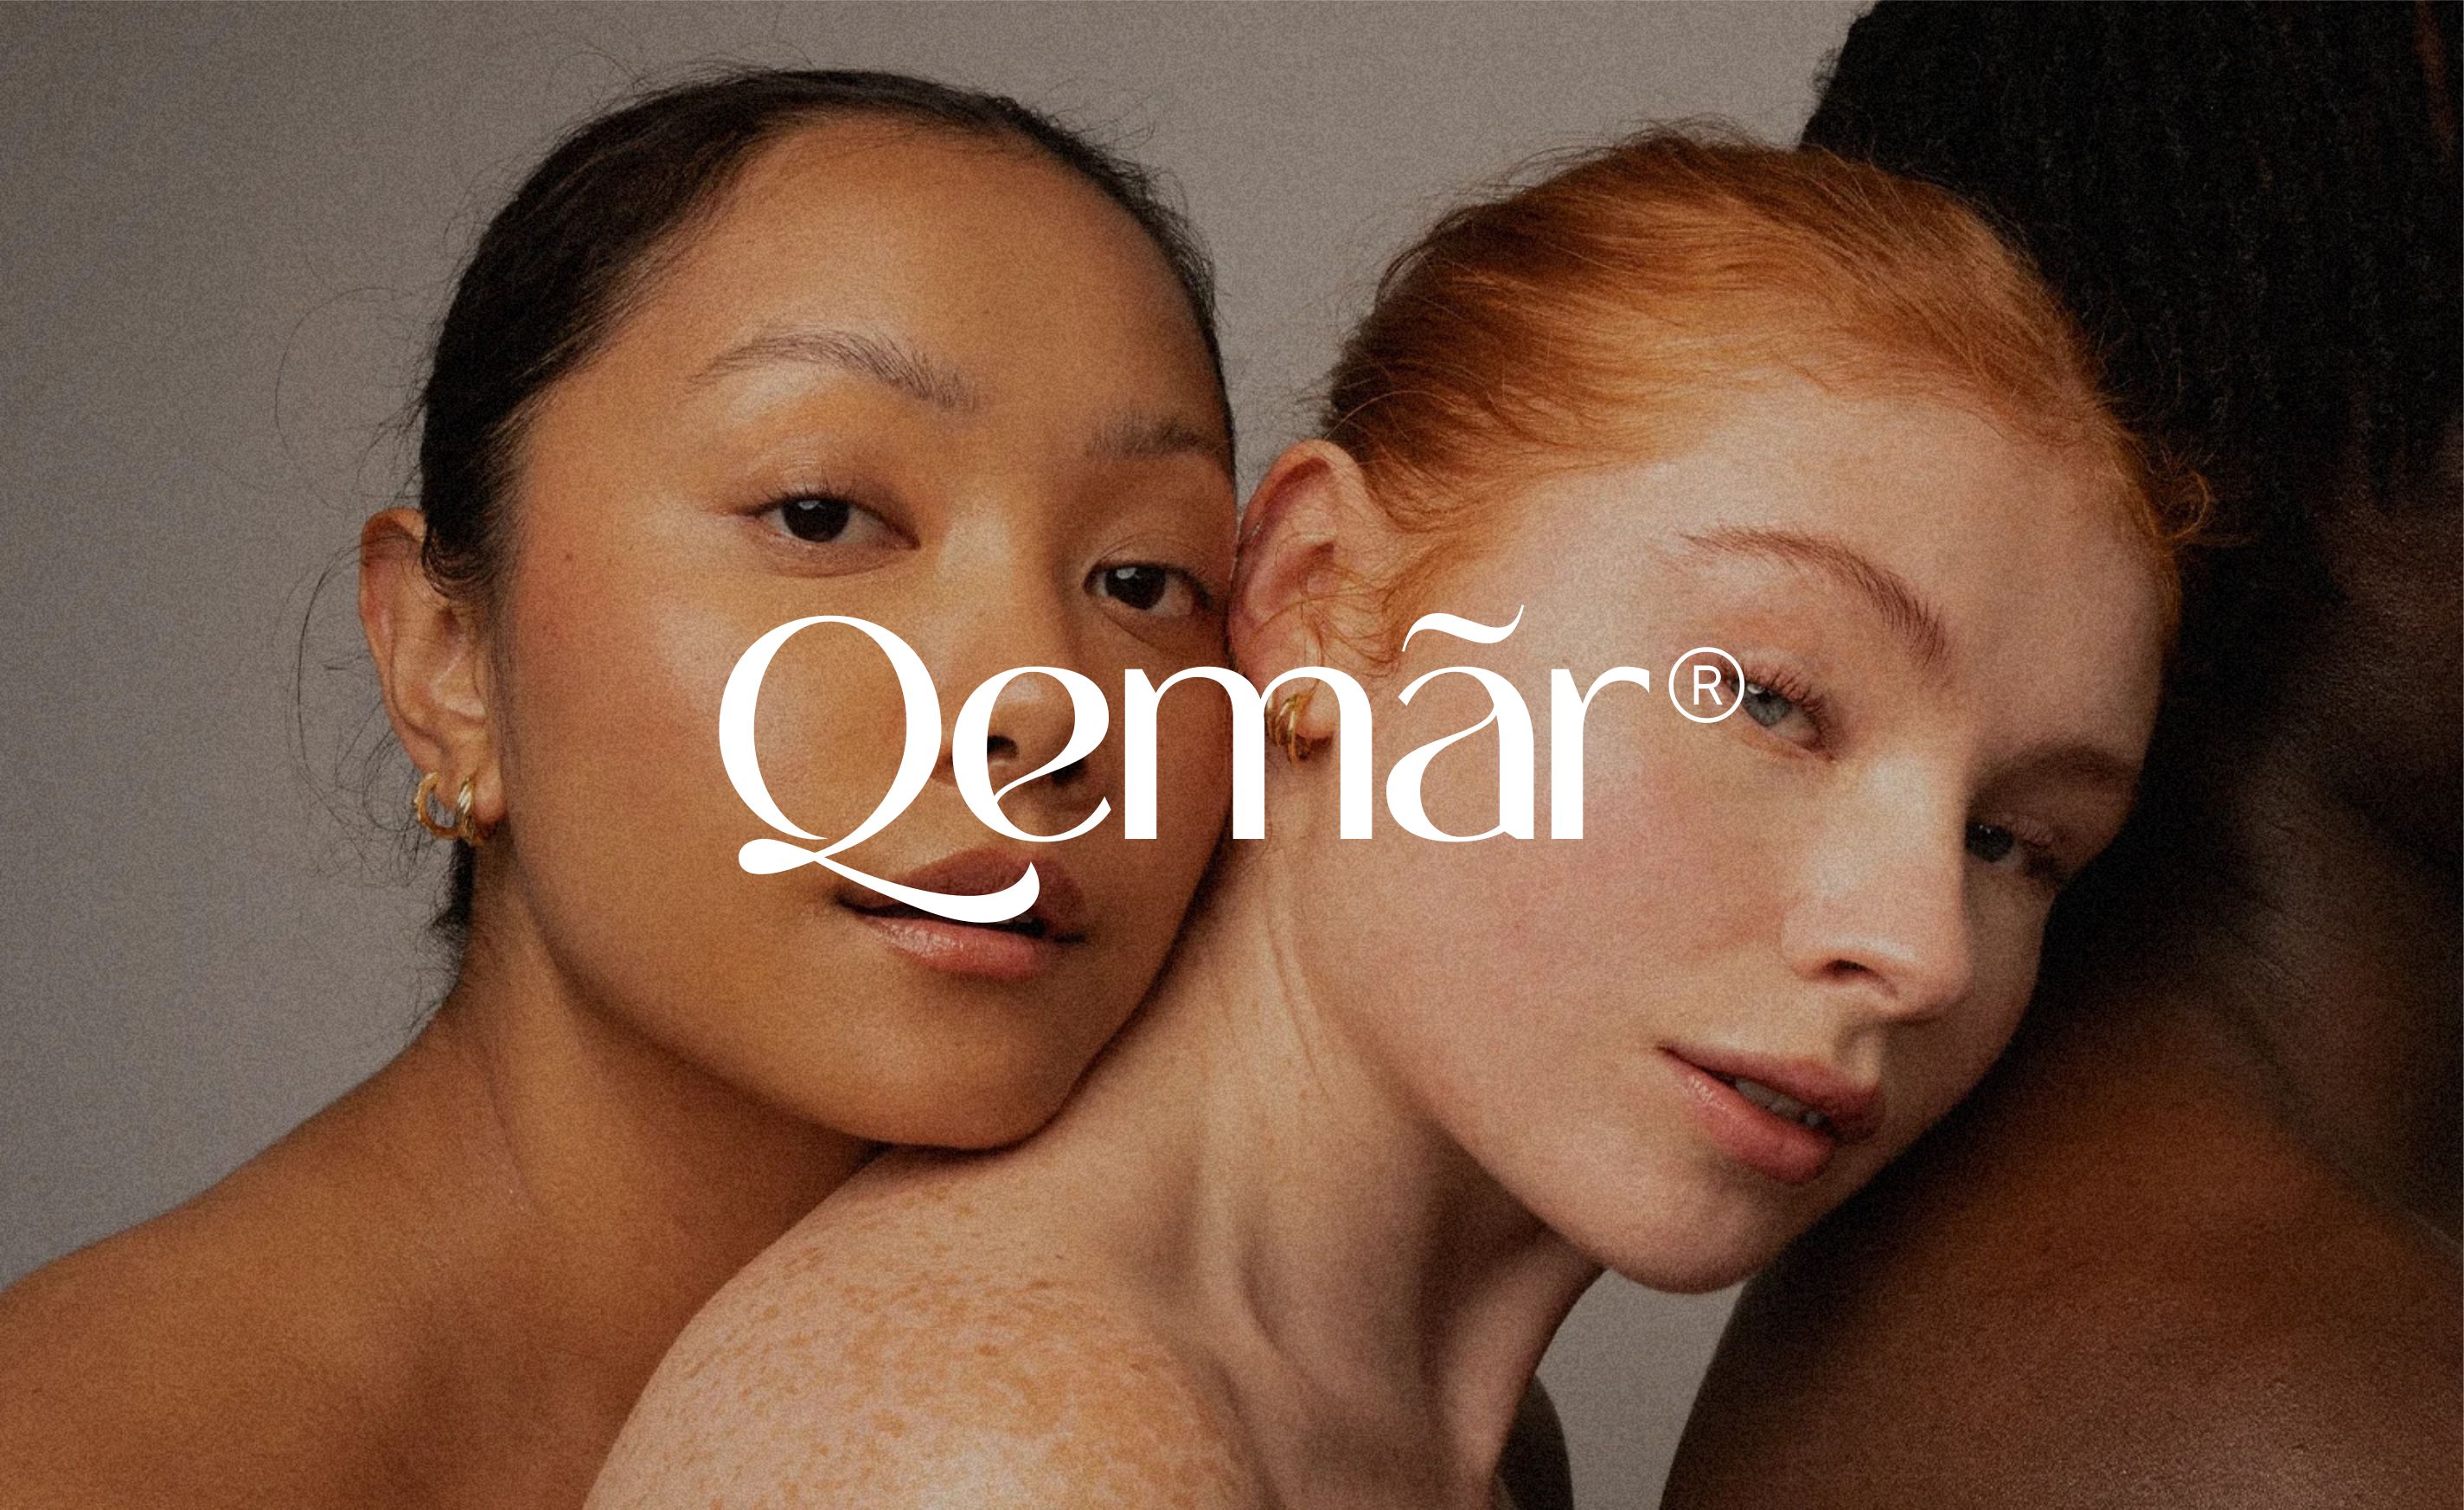 Femi Idris Crafts Brand Identity, Product Packaging and Website Design for Qemar